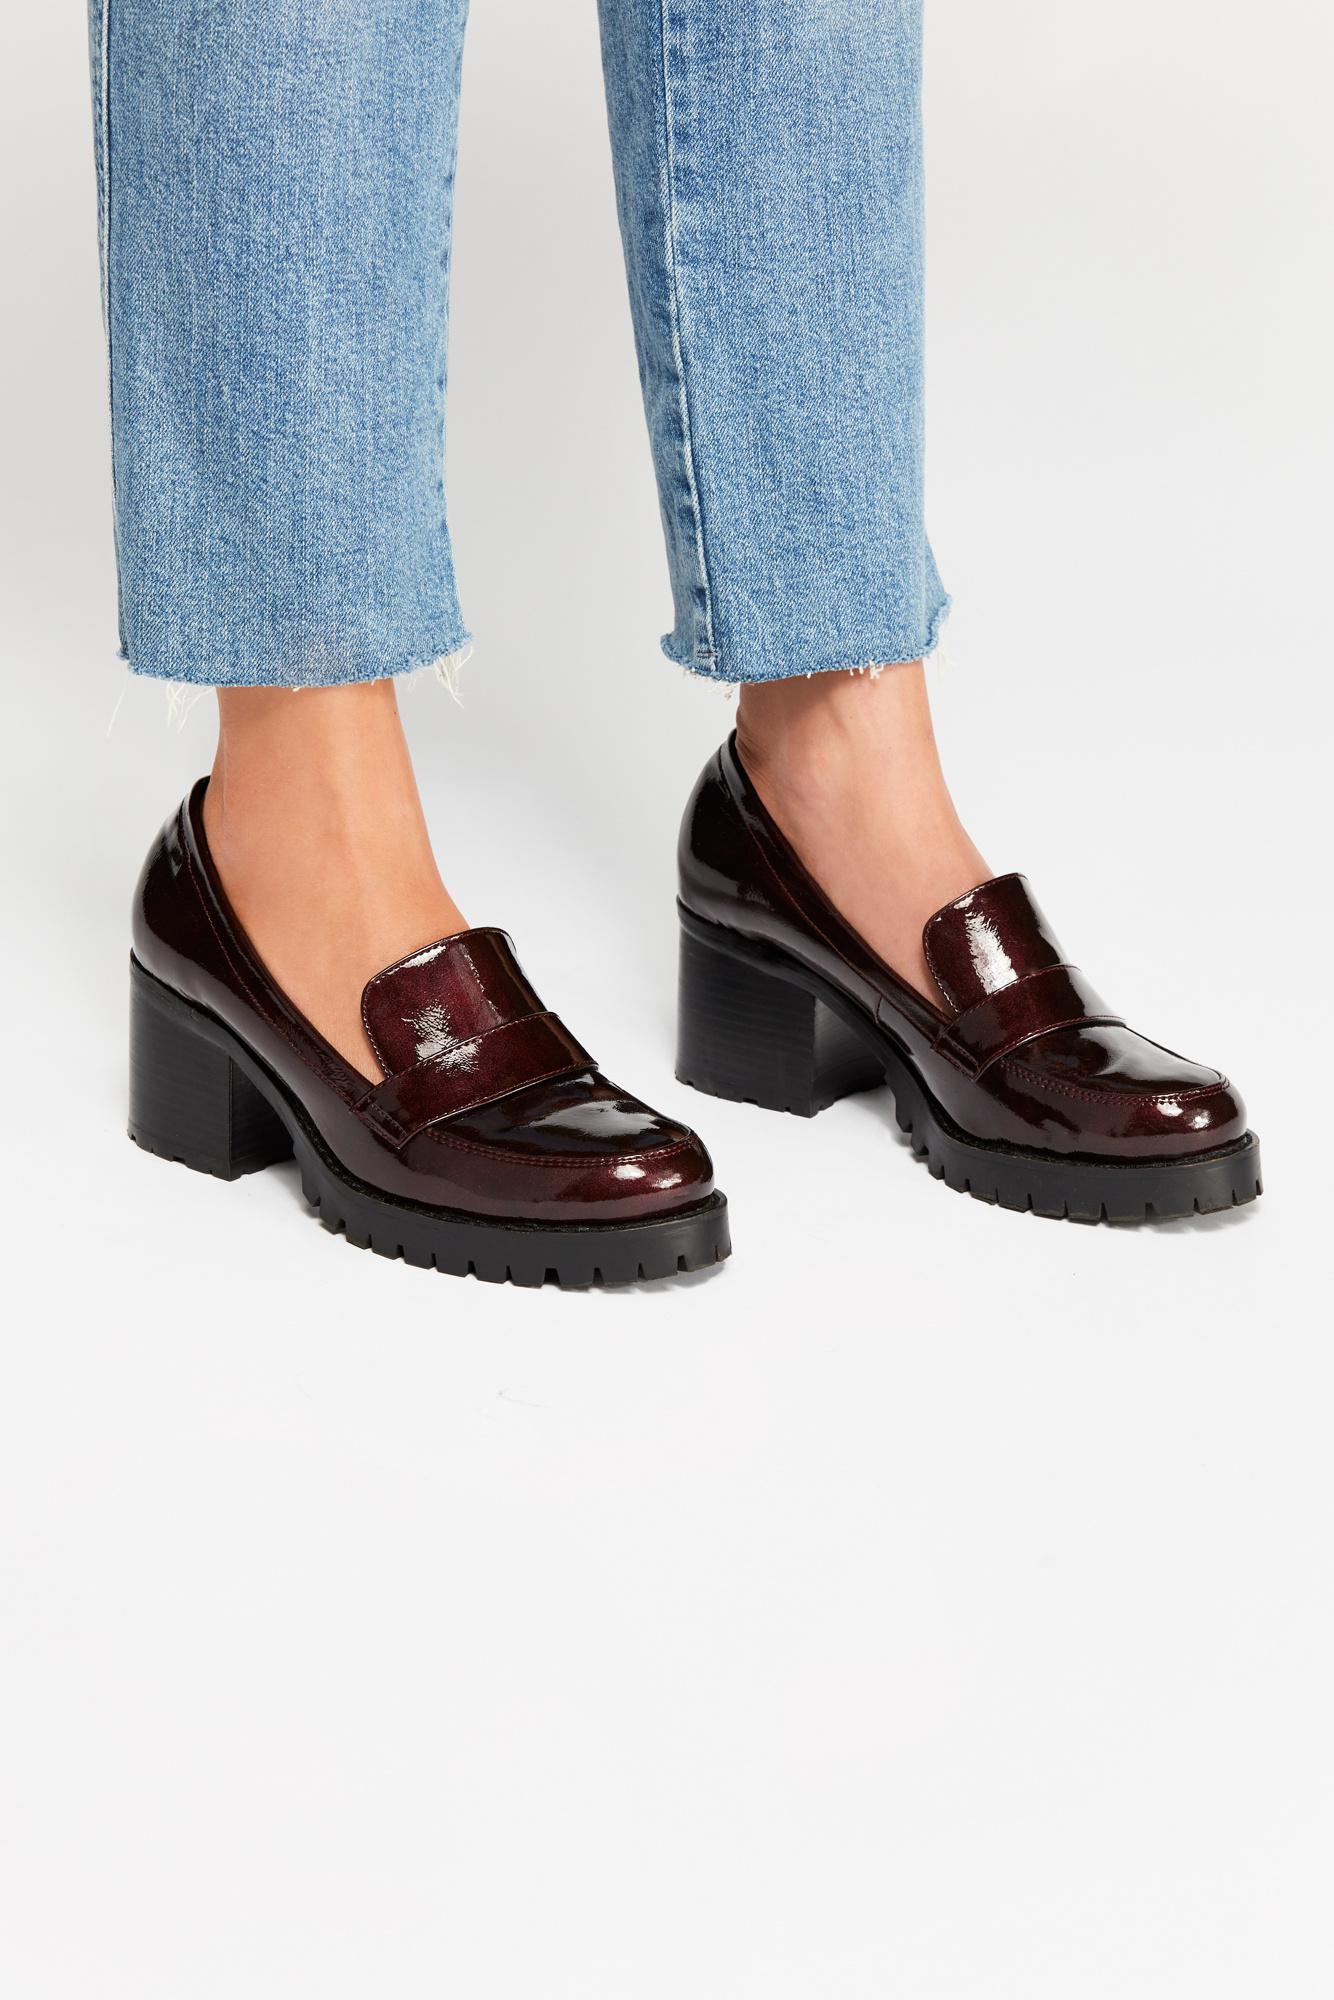 Free People Leather Lexden Block Heel Loafer By Jane And The Shoe in  Burgundy (Red) - Lyst